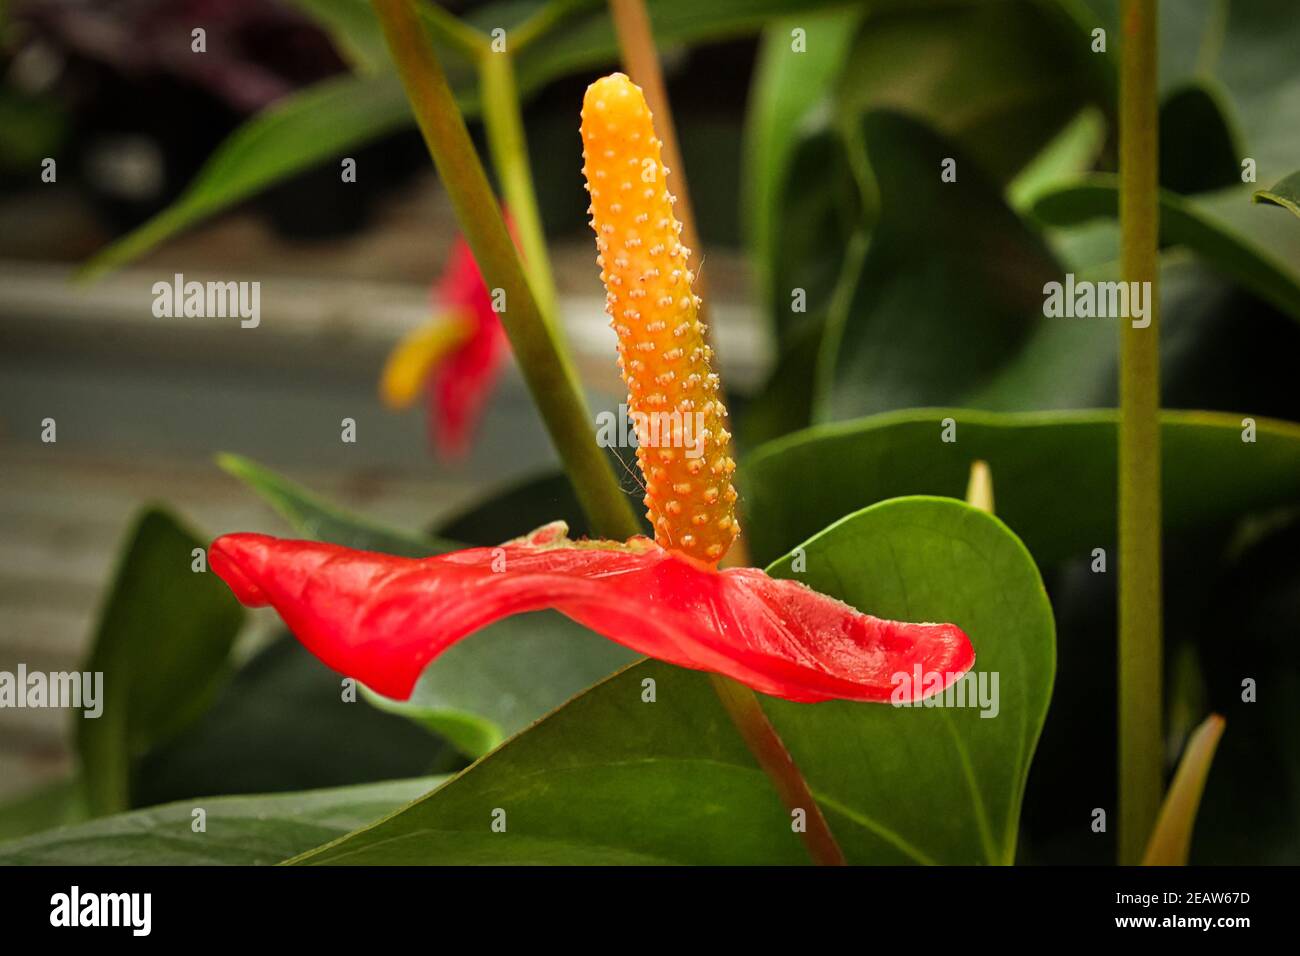 Macro side view of a flamingo flower Stock Photo